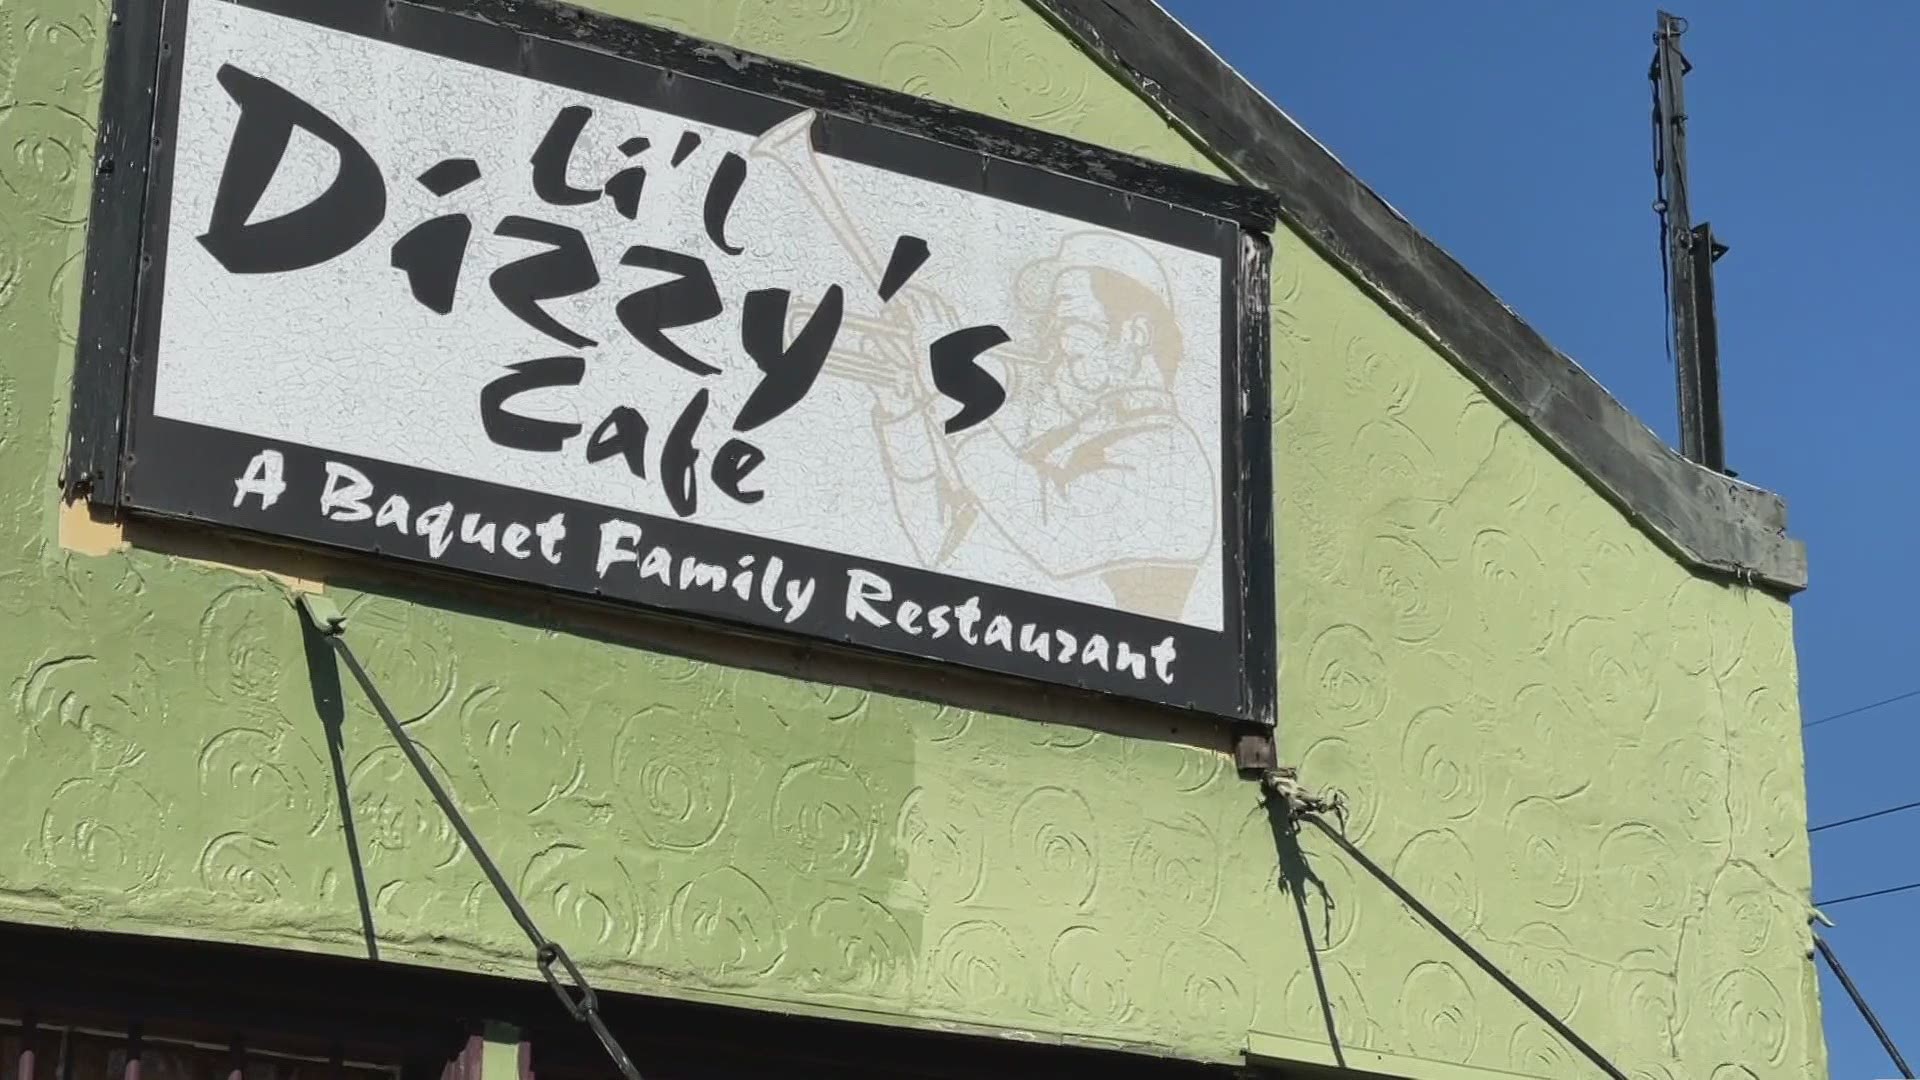 In our food segment Today's Main Course, we're taking you inside the new Li'l Dizzy's which reopened this week.